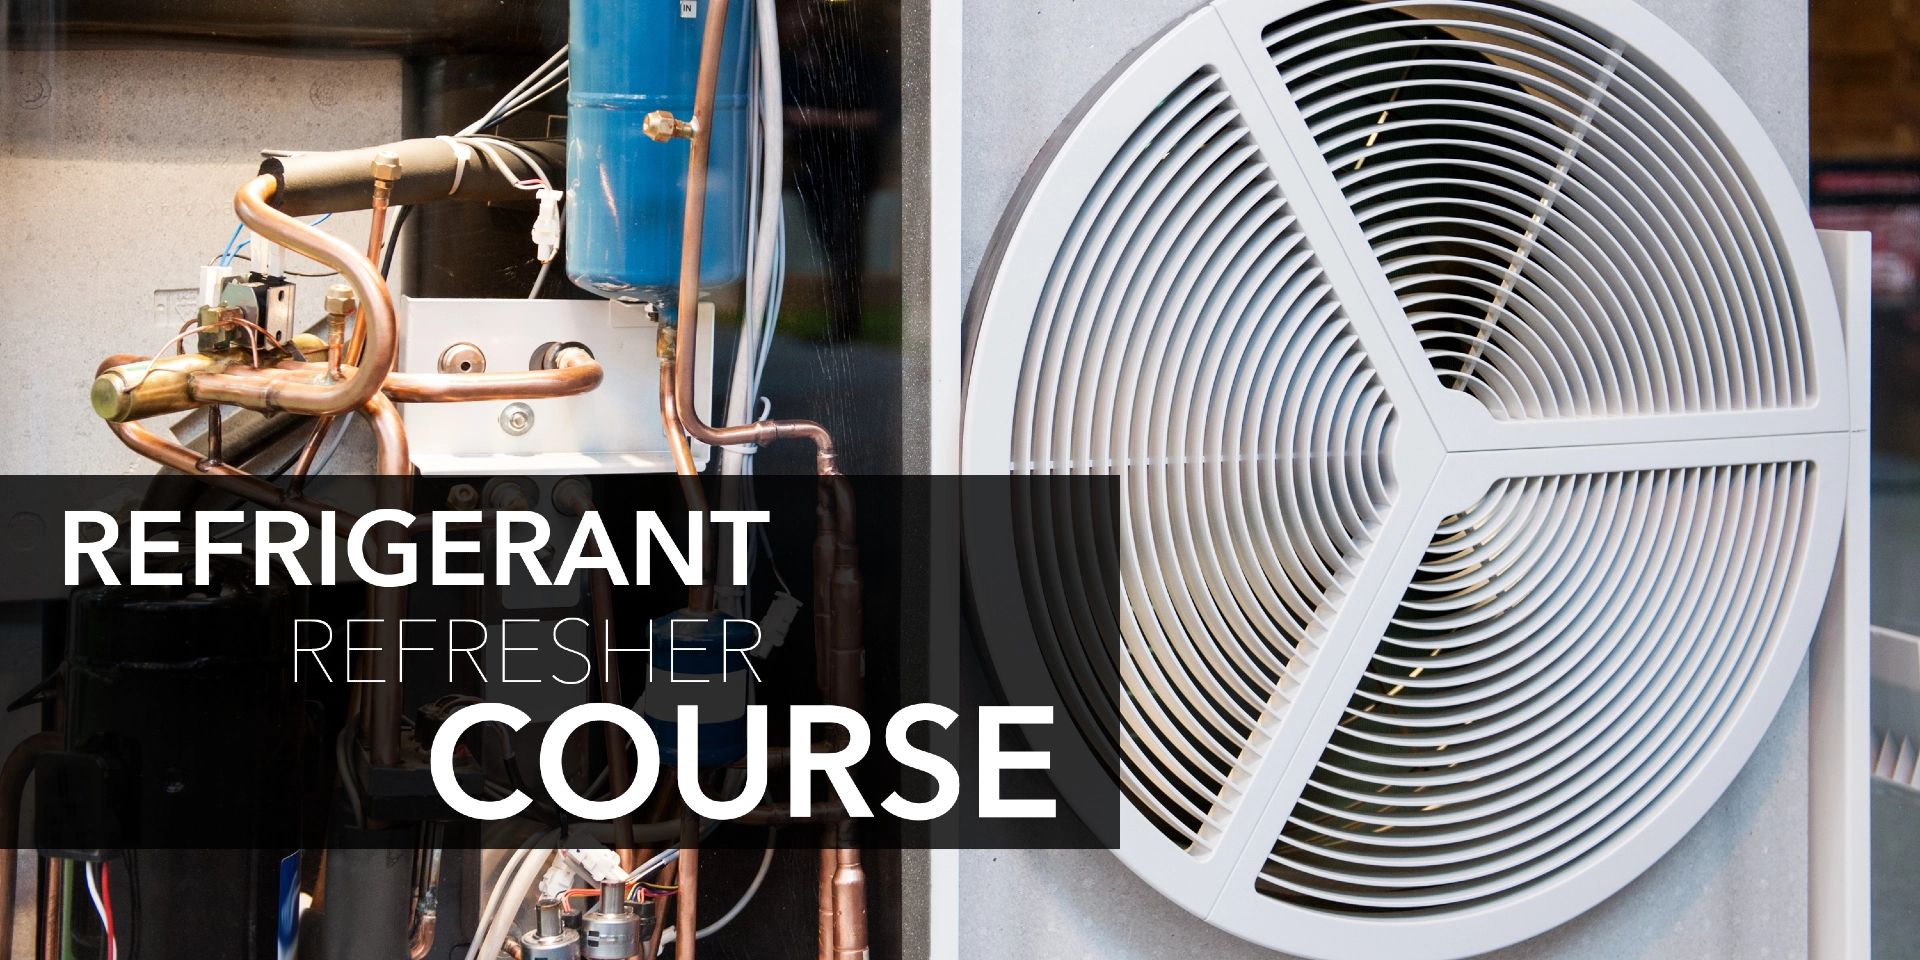 AC equipment with text: "Refrigerant refresher course"